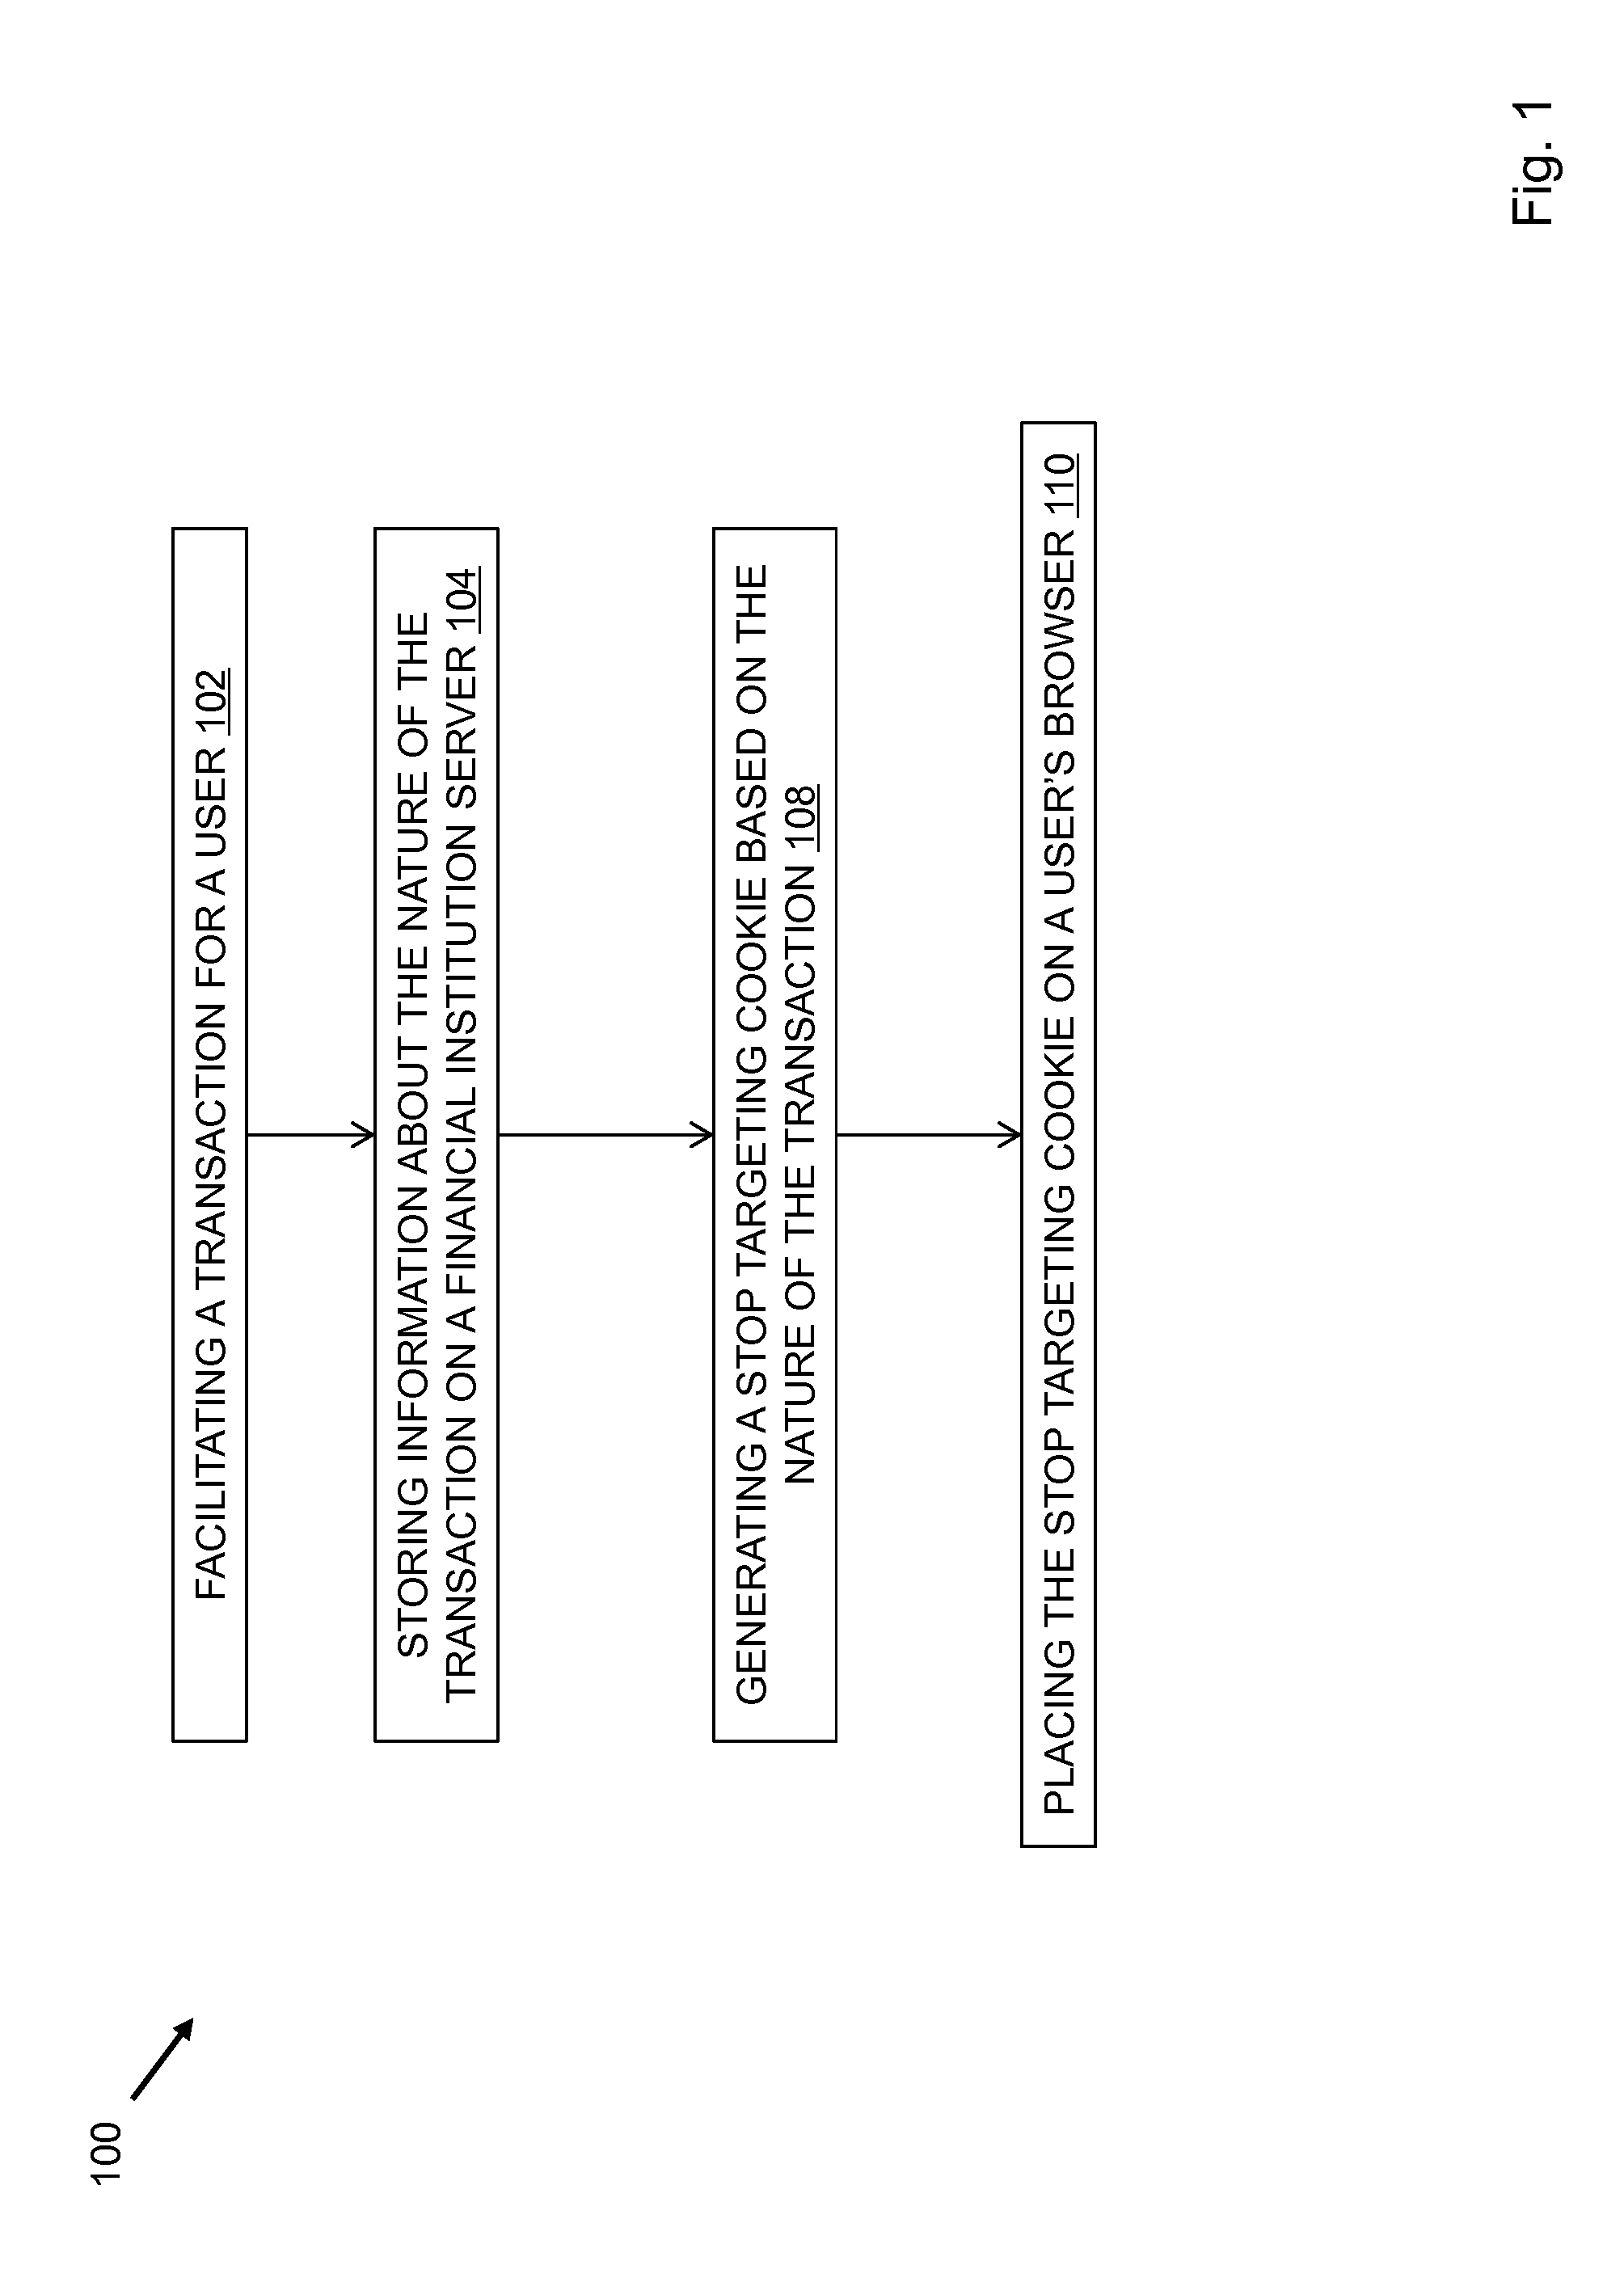 Method to stop serving re-targeting ads to a consumer by leveraging a purchase signal from transaction data